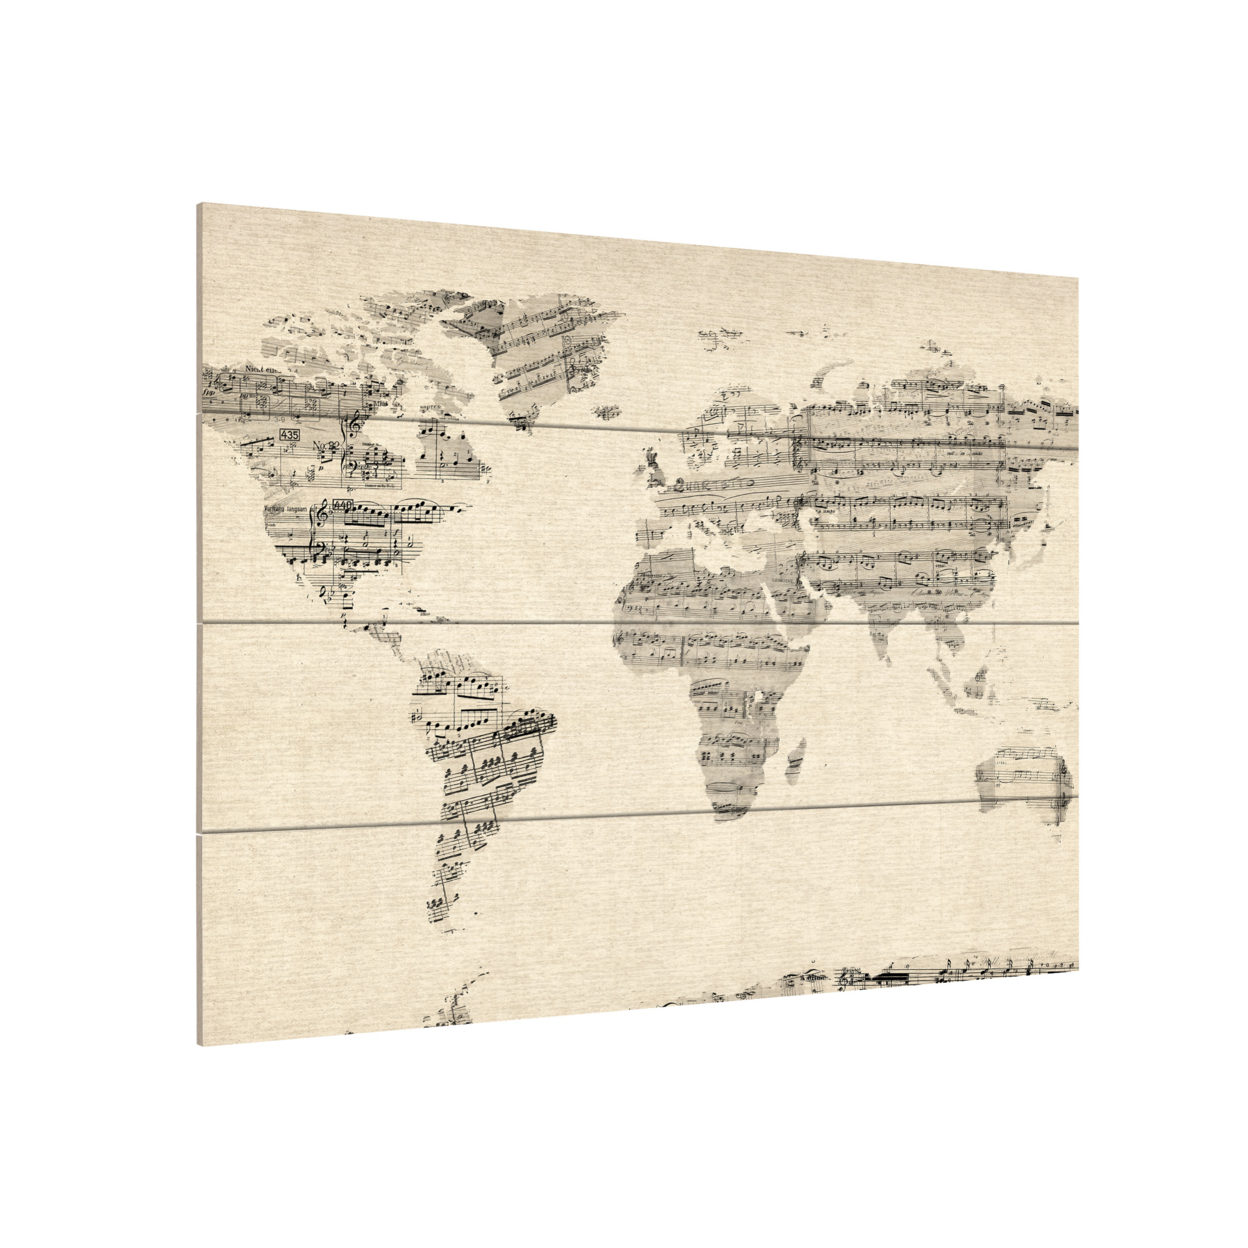 Wall Art 12 X 16 Inches Titled Old Sheet Music World Map Ready To Hang Printed On Wooden Planks